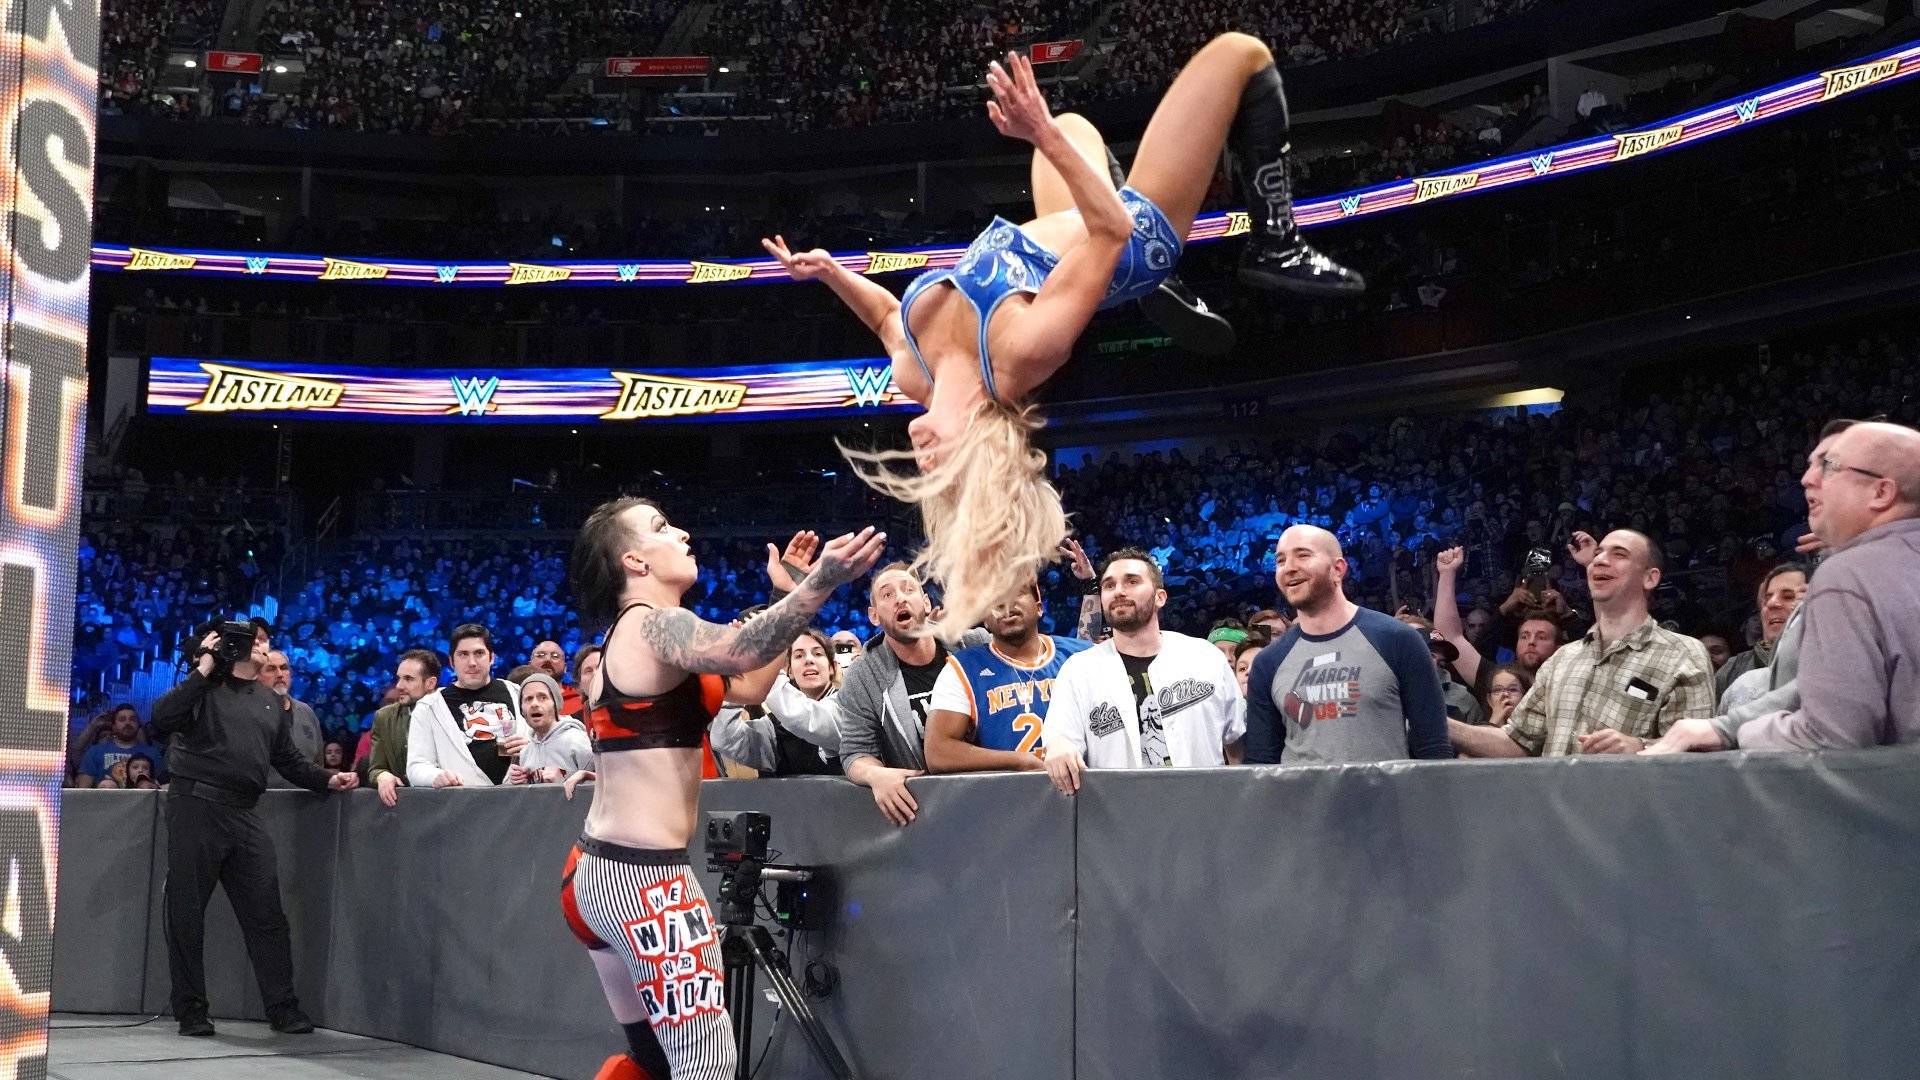 Charlotte Flair hits a vicious moonsault on Ruby Riott from atop the ringside barrier: WWE Fastlane 2018 (WWE Network Ex